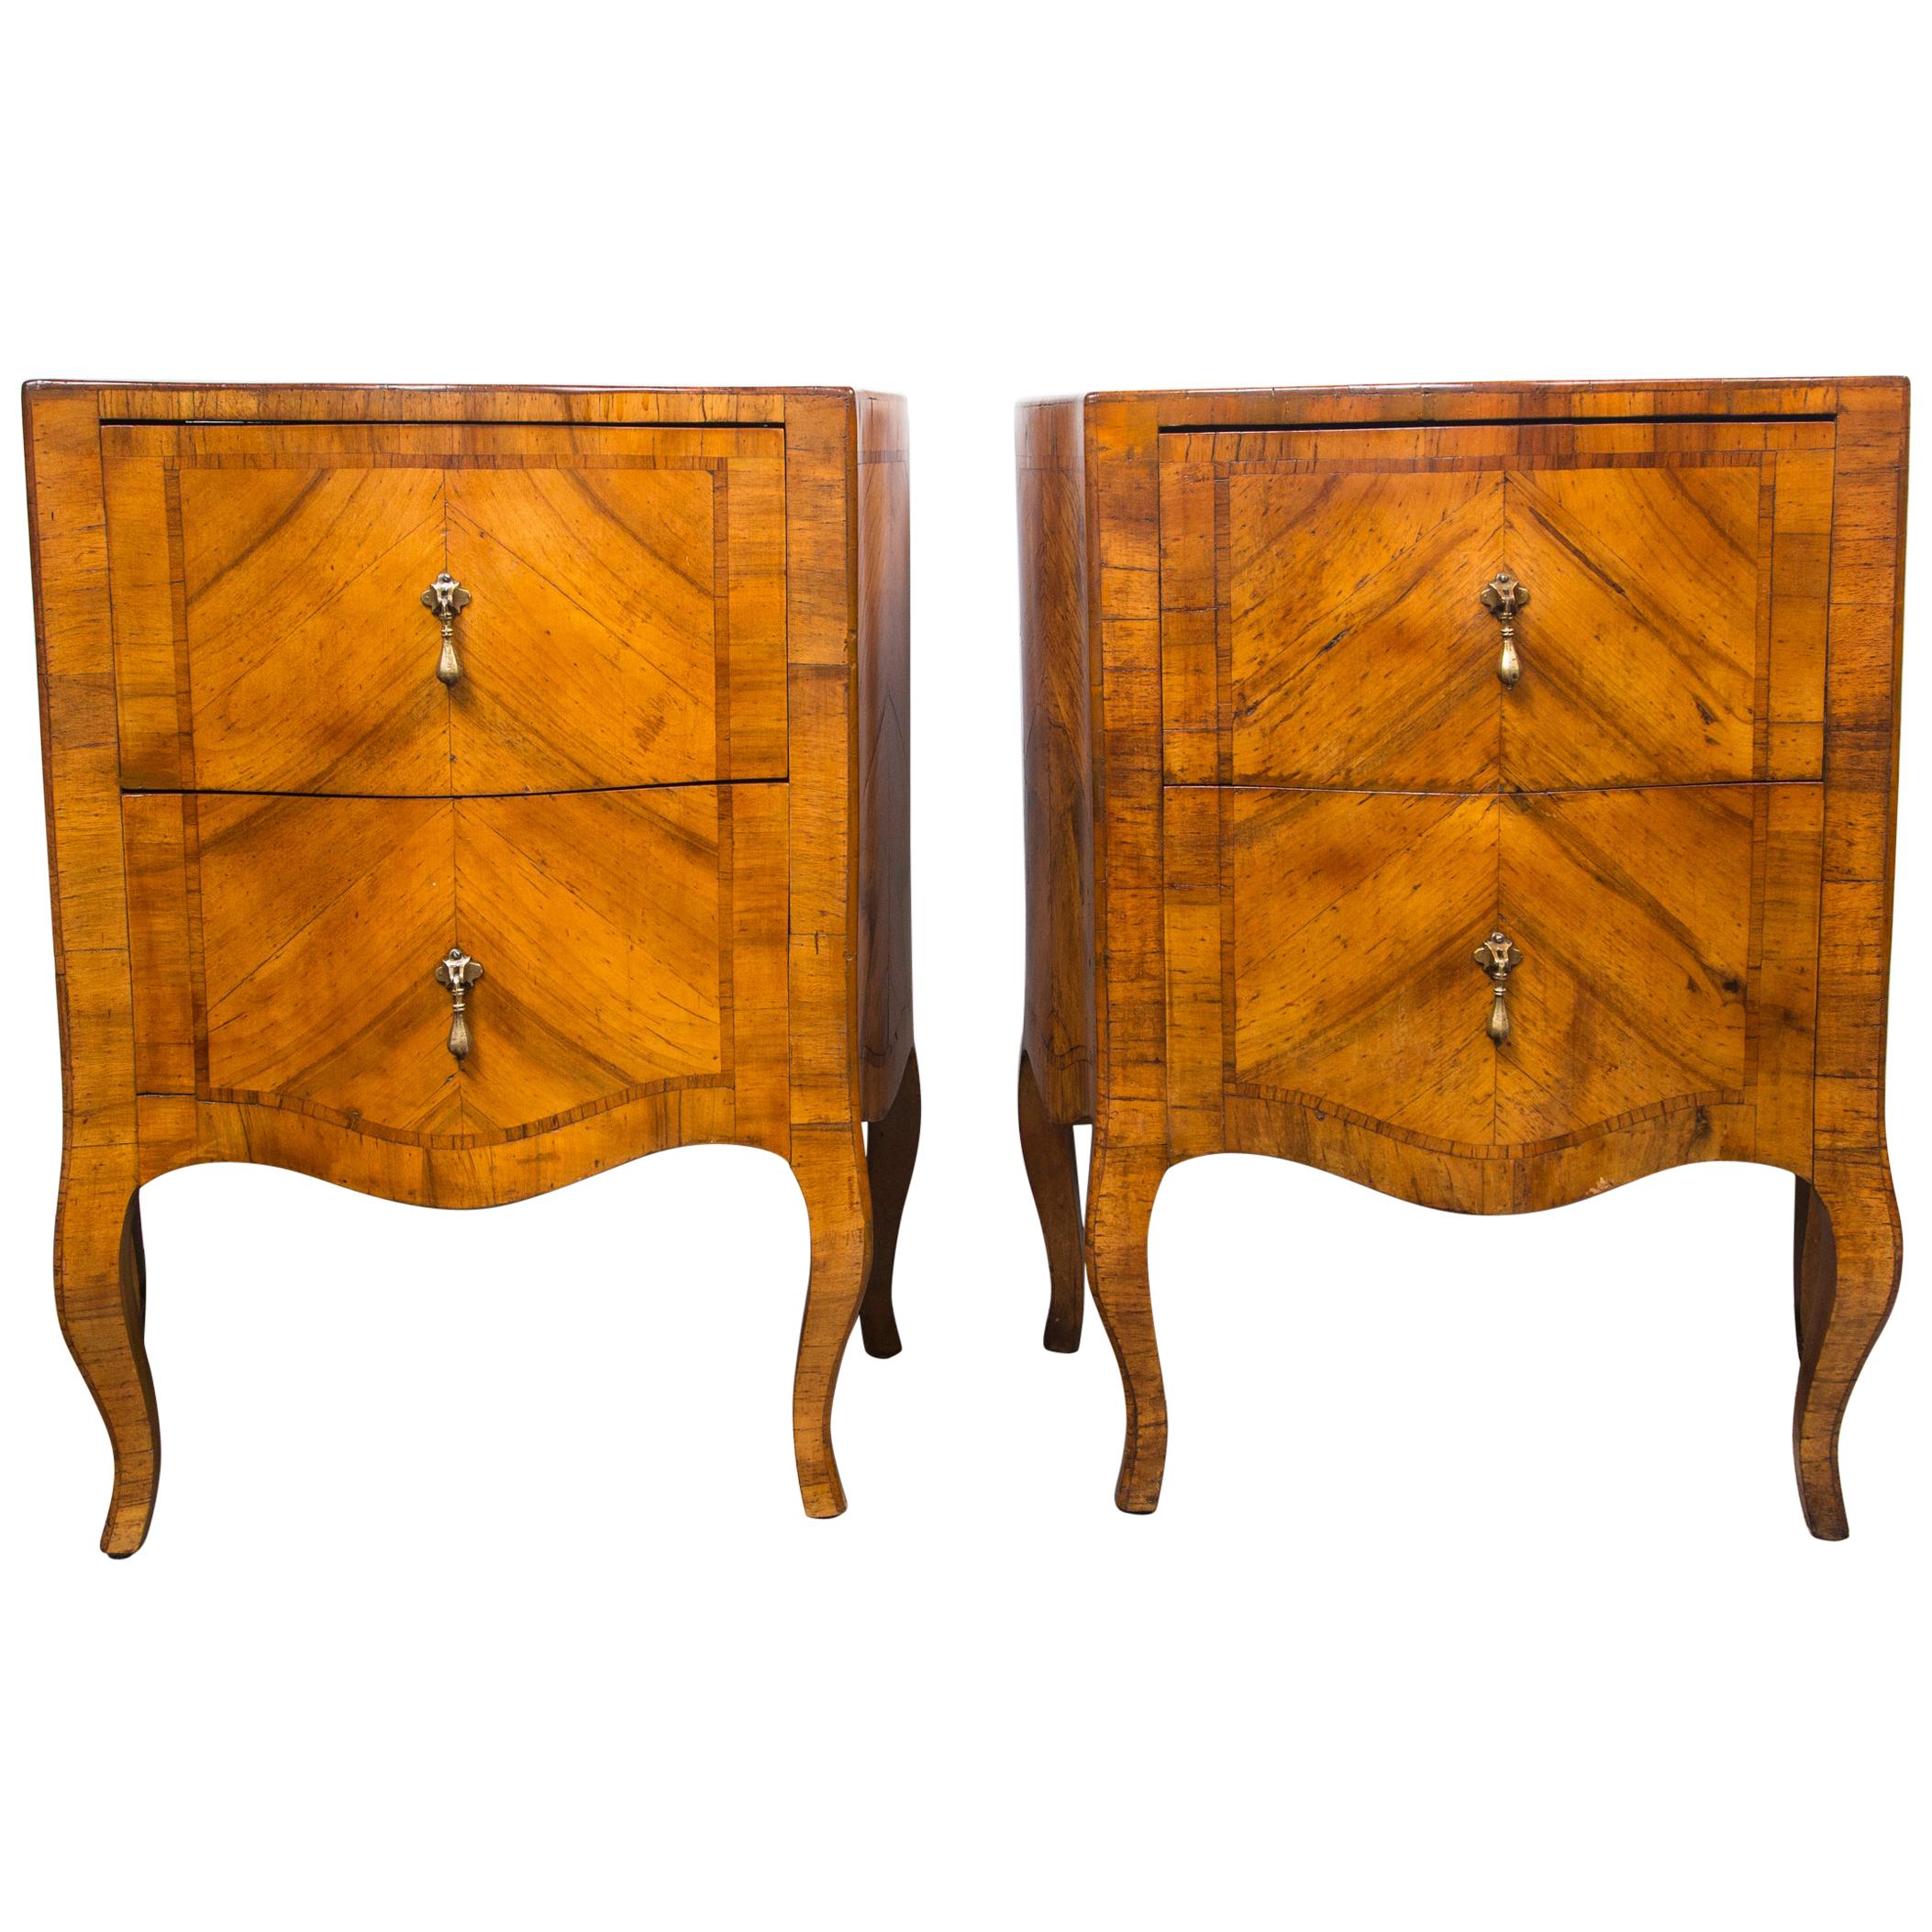 Pair of Fruitwood Bedside Commodes